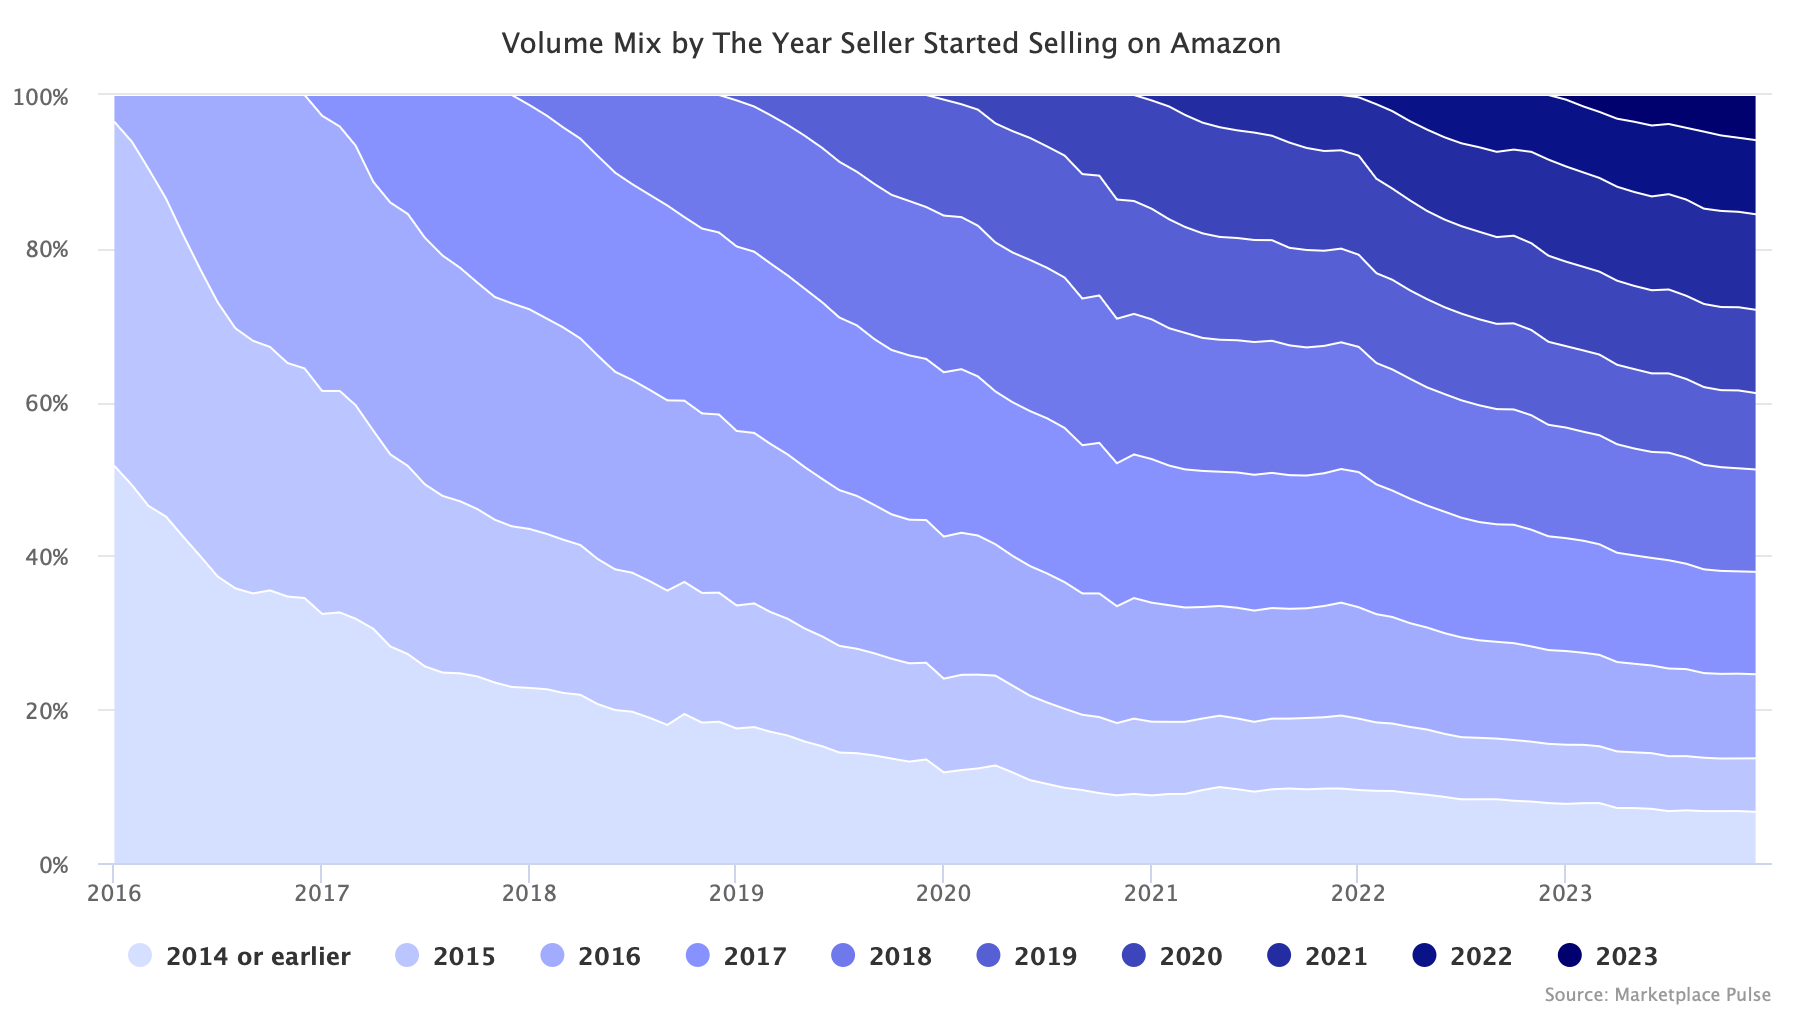 Volume Mix by The Year Seller Started Selling on Amazon